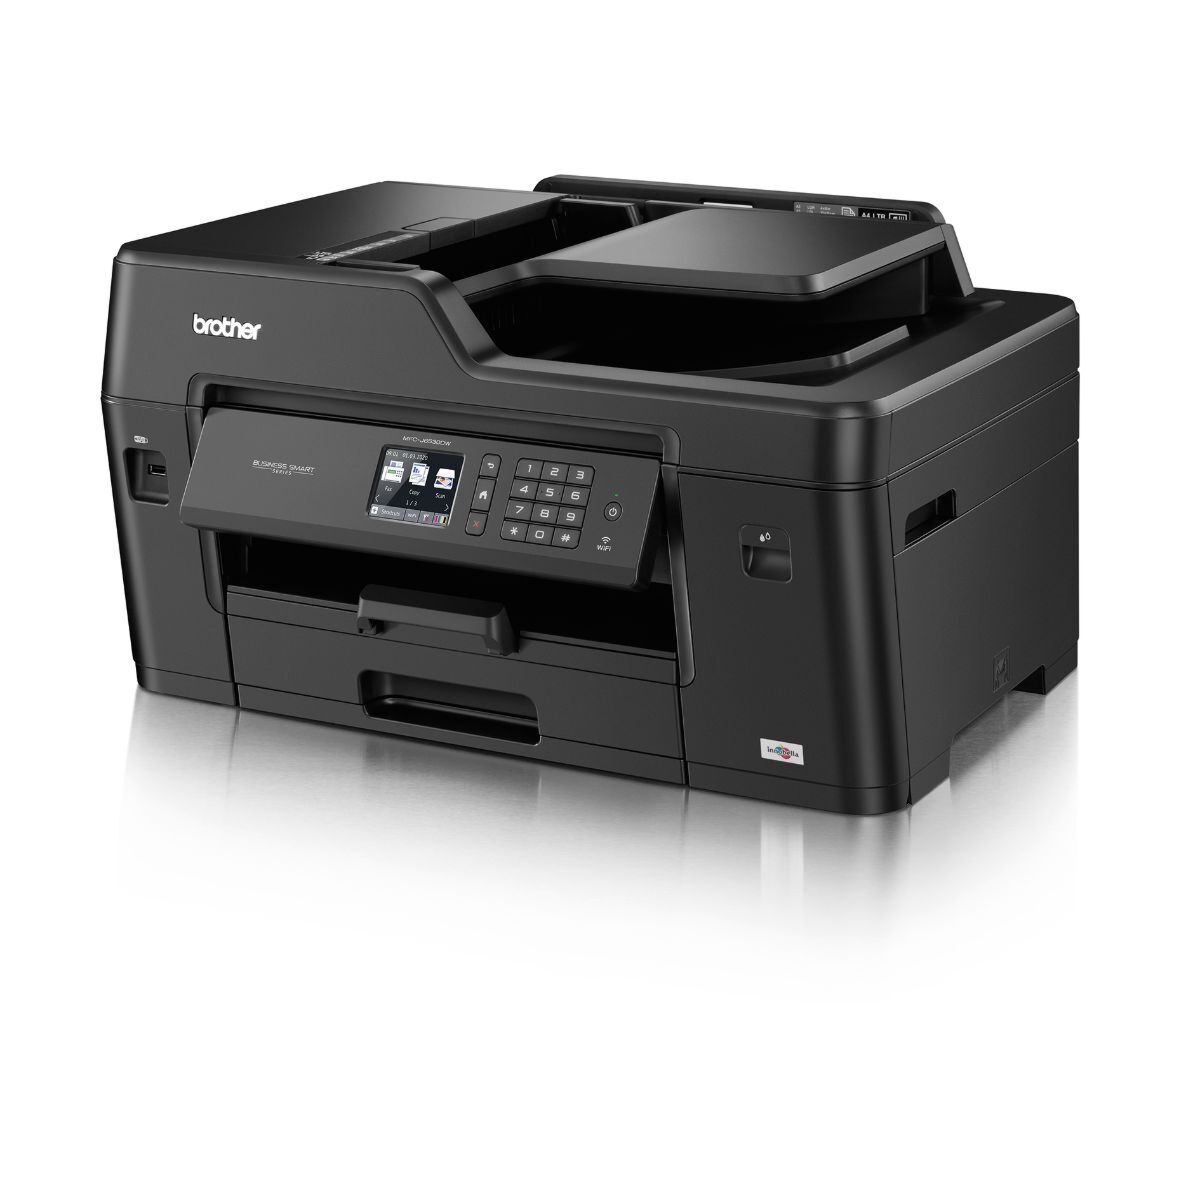 Brother MFC-J6530DW Colour Inkjet All-in-One A3 Printer -